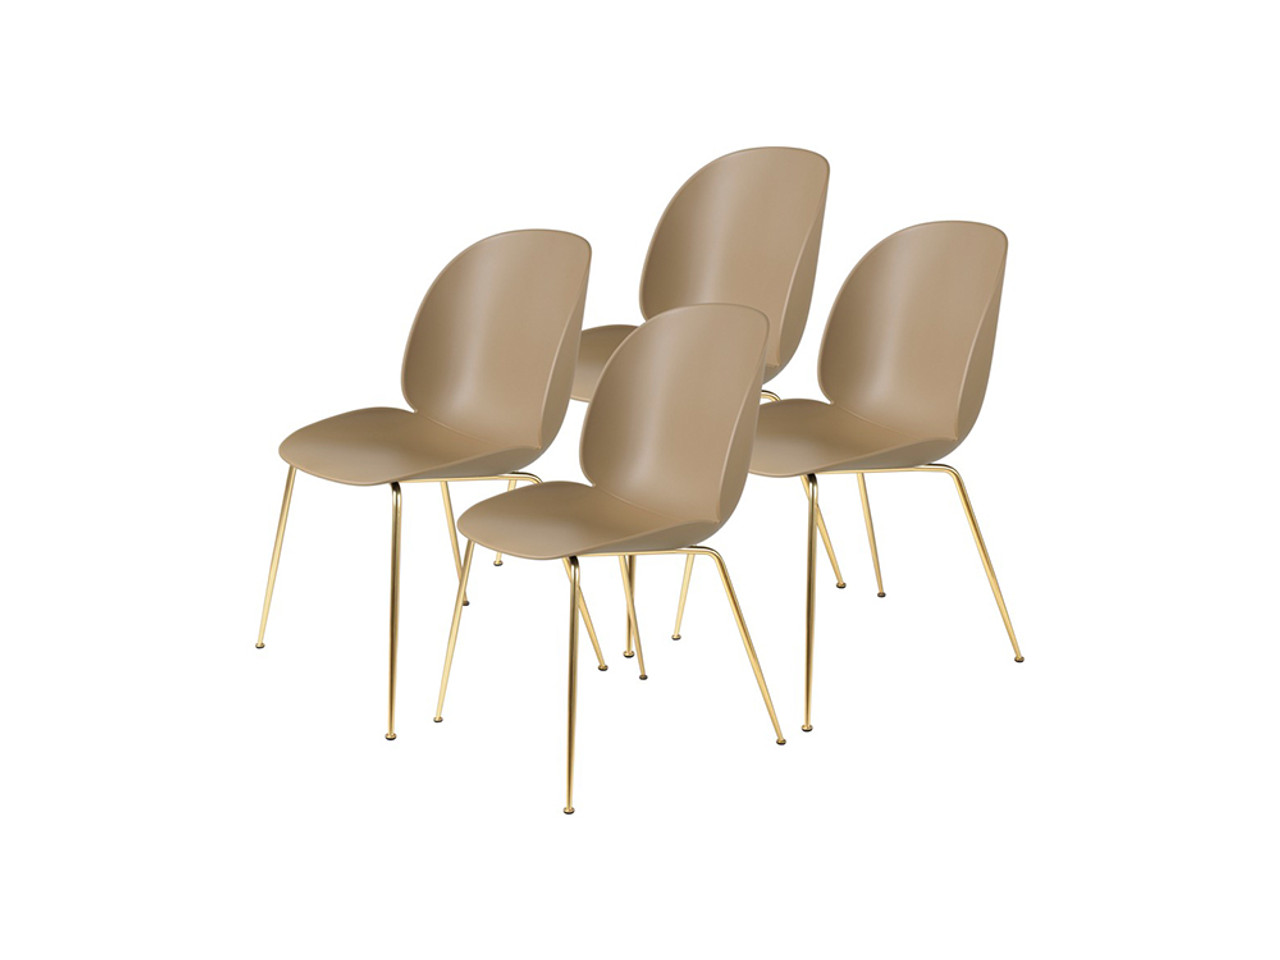 Beetle Dining Chair - Unupholstered - Set of 4 -  Quickship